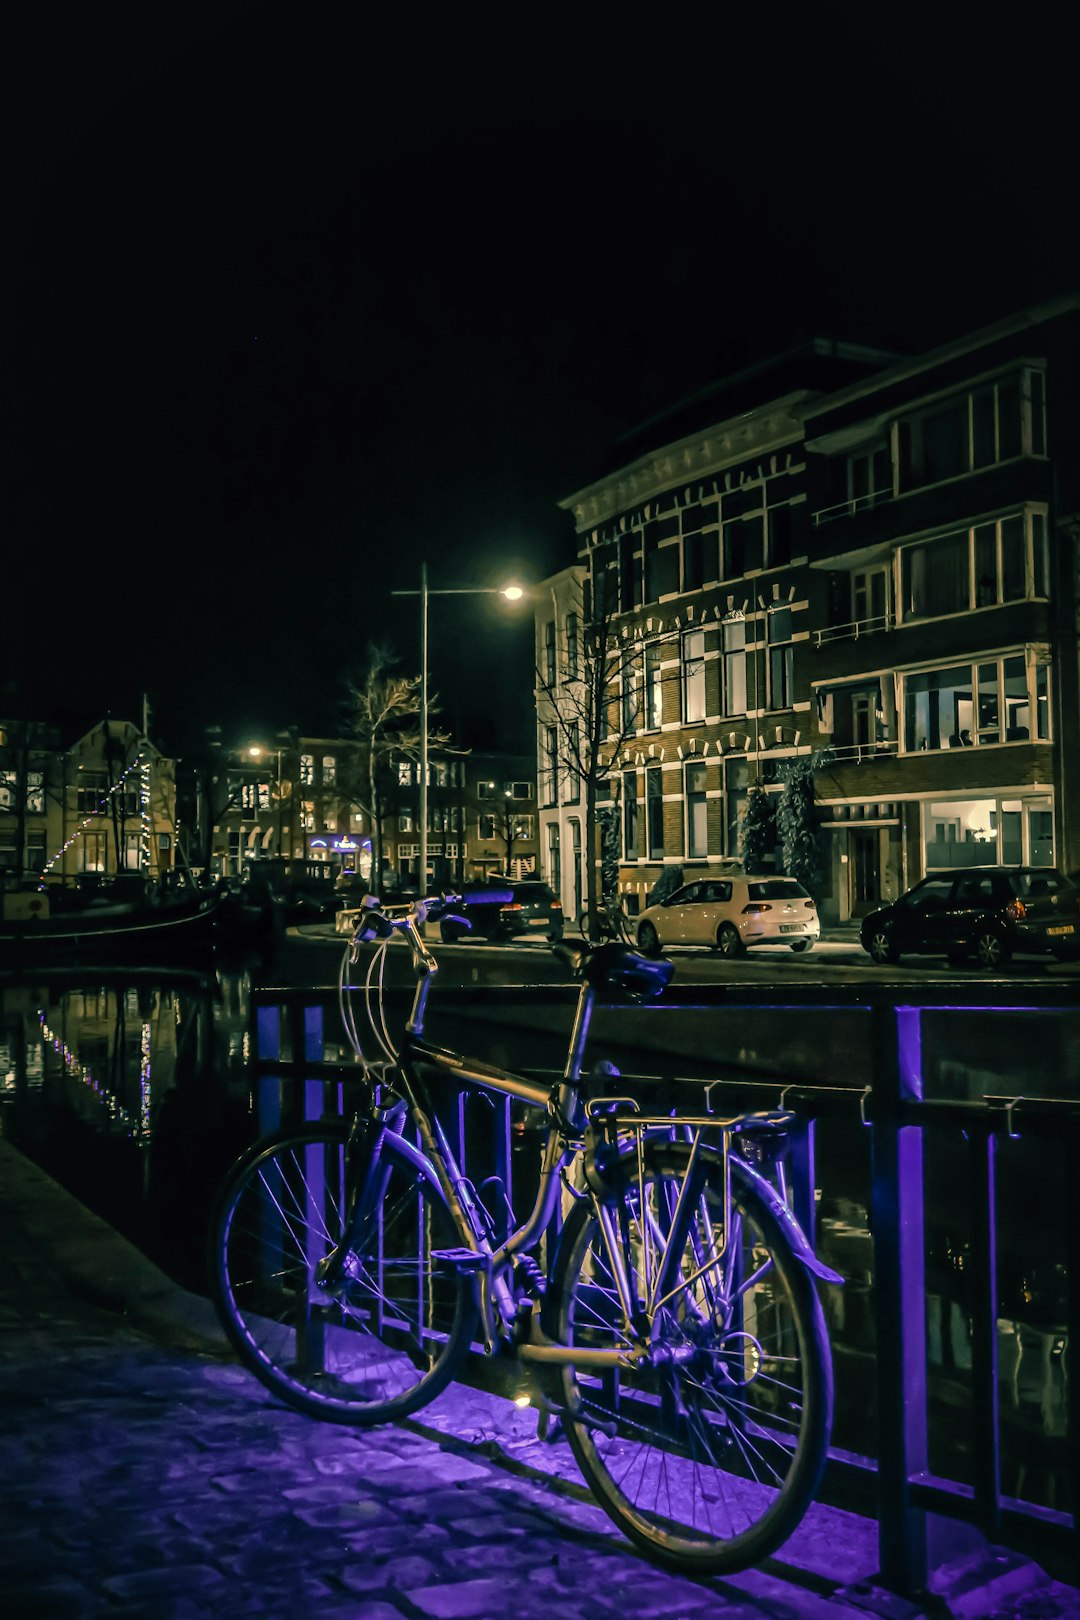 blue bicycle parked beside black metal railings near body of water during night time